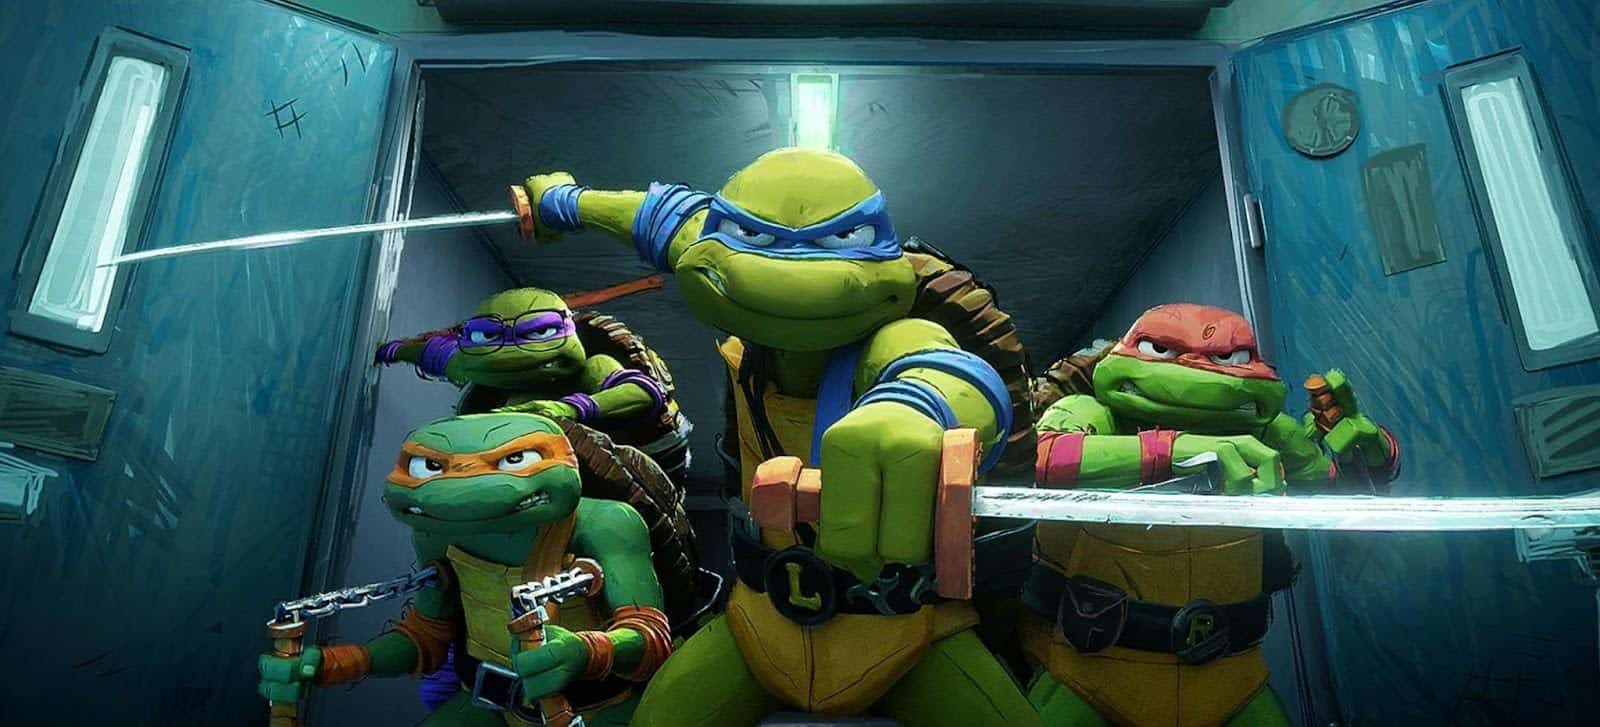 Four animated ninja turtles stand in a battle pose in this image from Nickelodeon Movies.